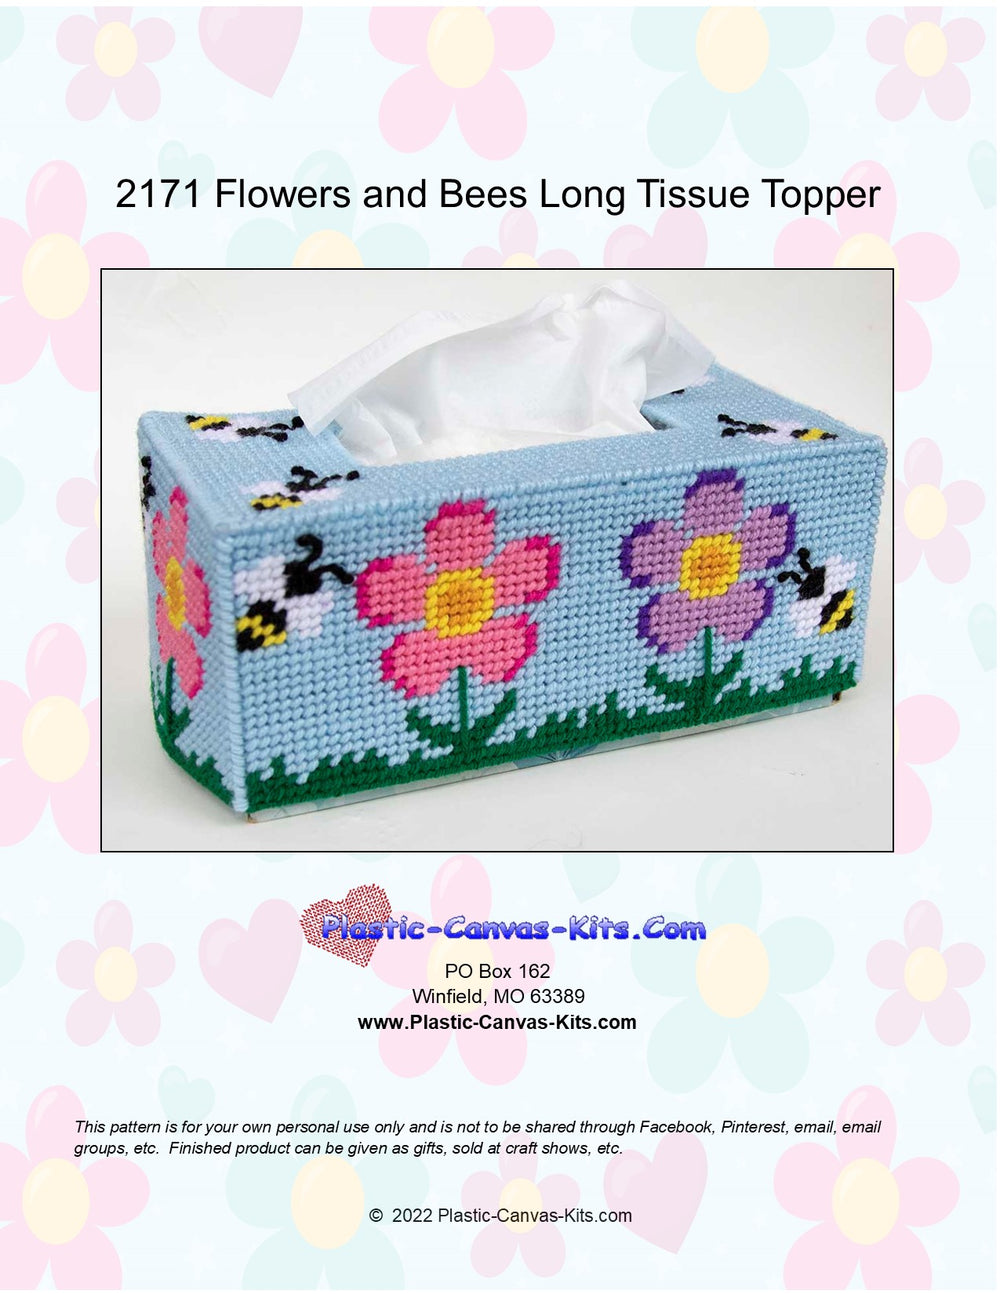 Flowers and Bees Long Tissue Topper